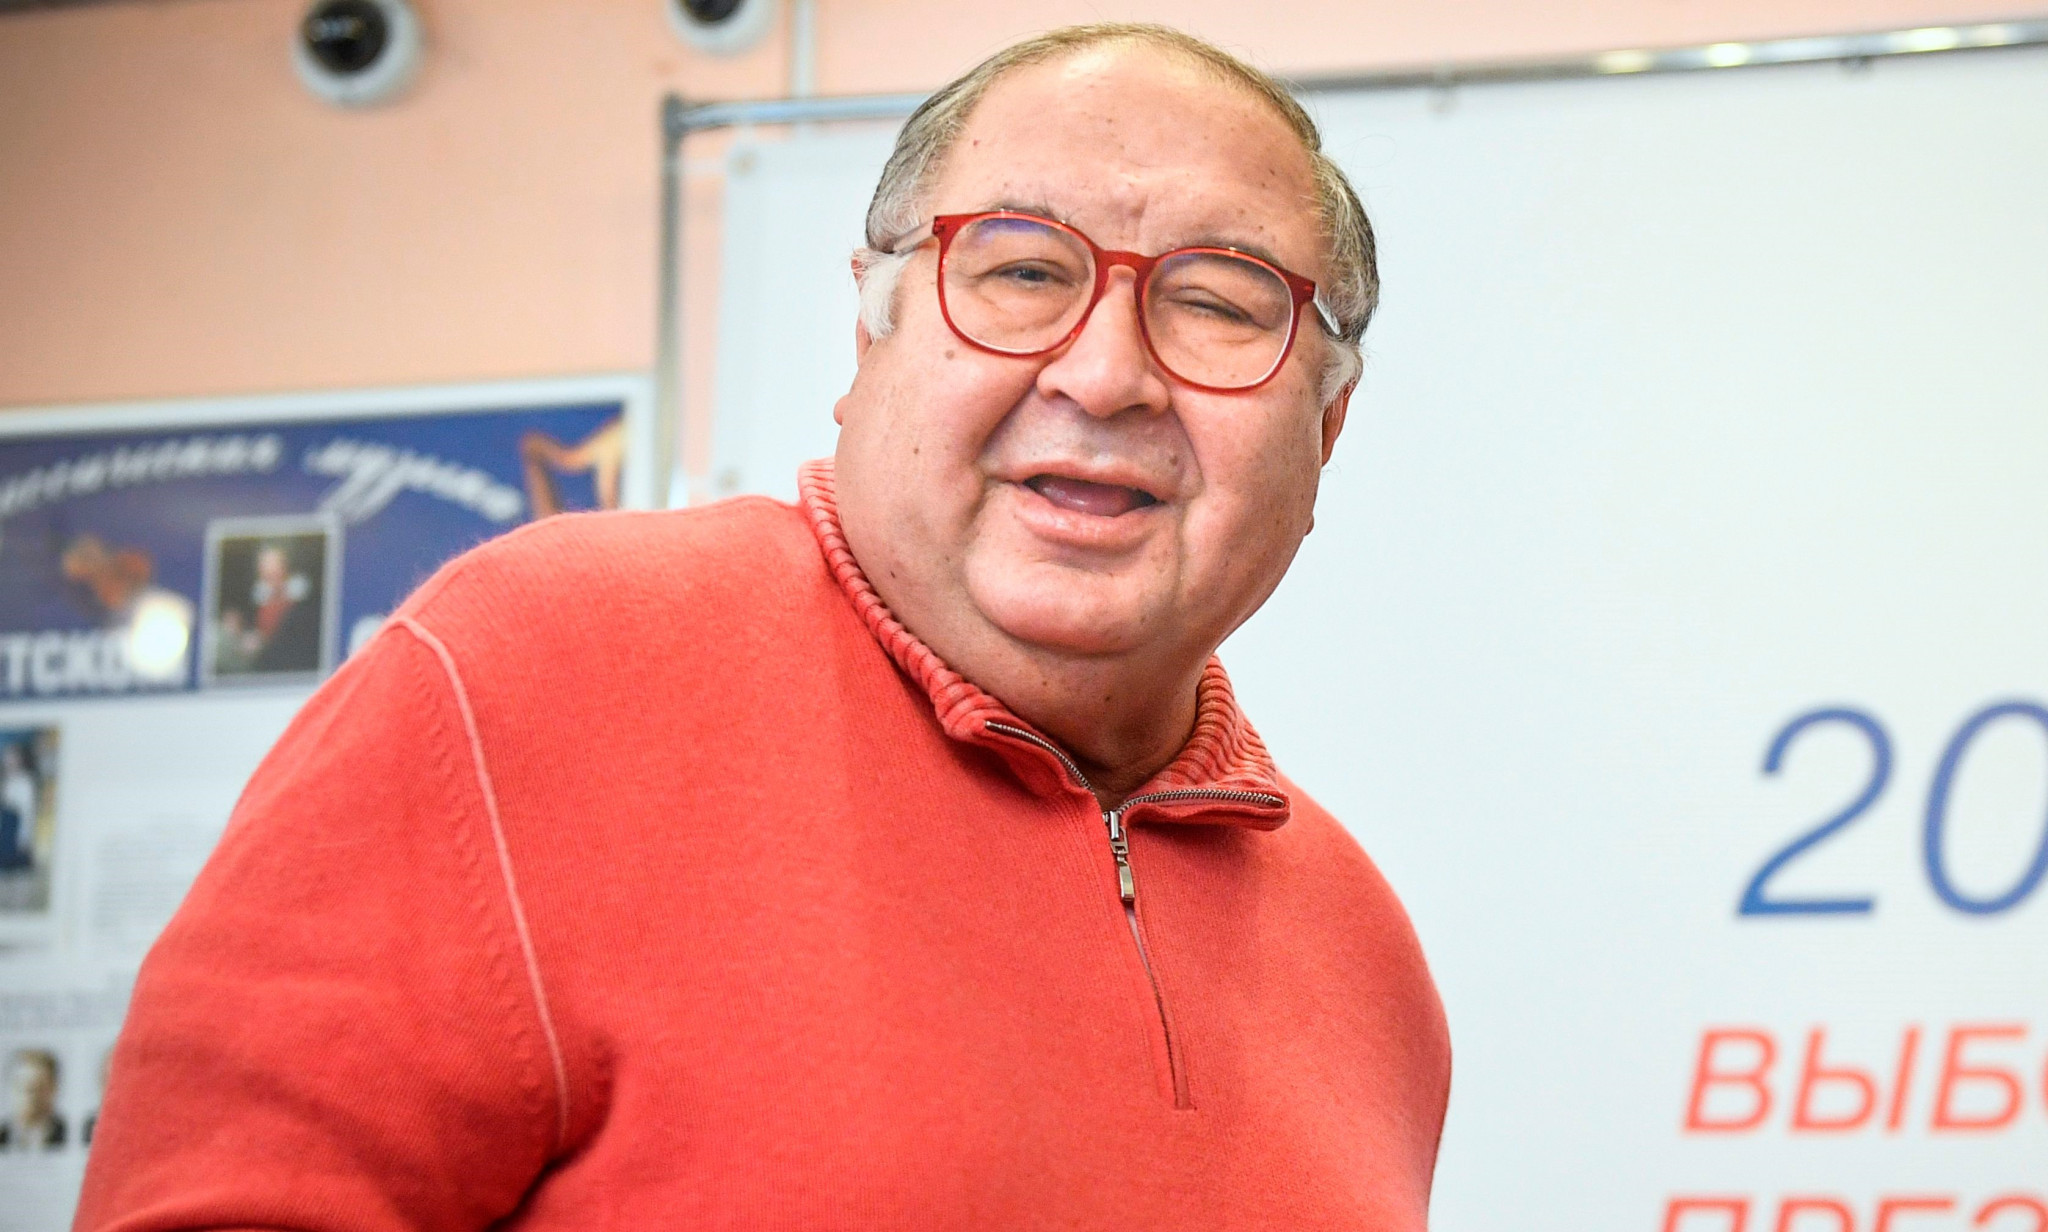 Exclusive: Russian Fencing Federation set to lobby Bach for Usmanov reinstatement